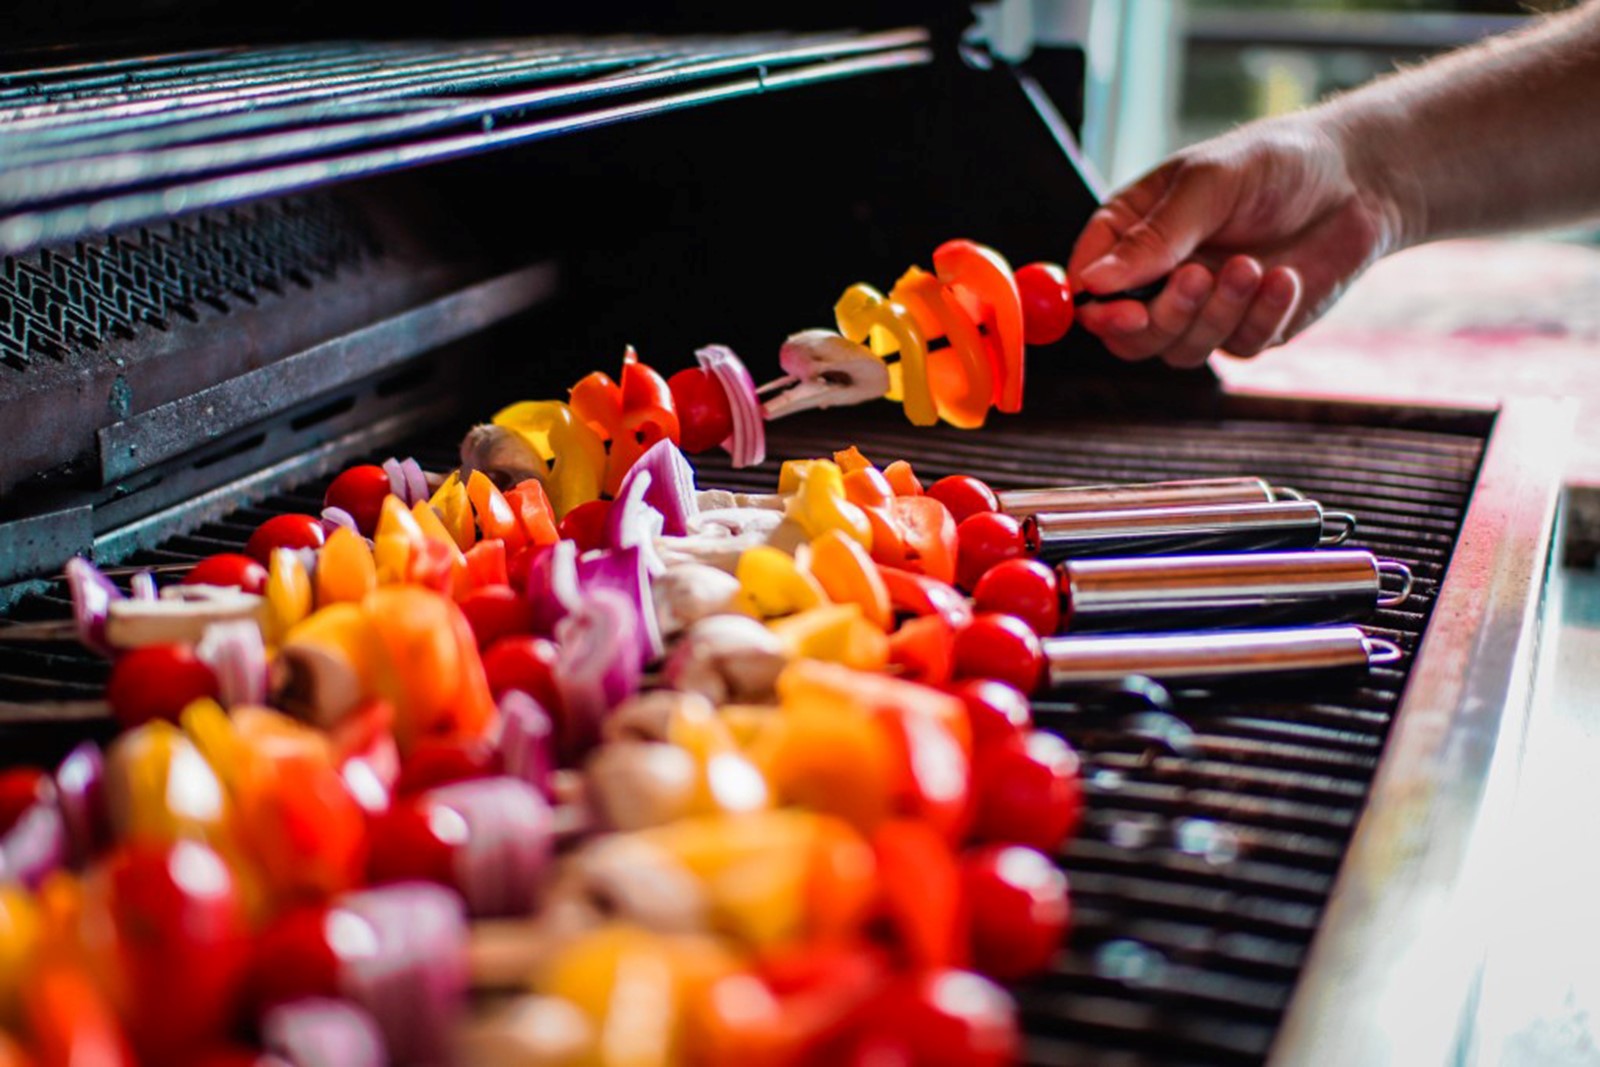 A mans hand laying colorful vegetable kebabs on a gas grill in summer.